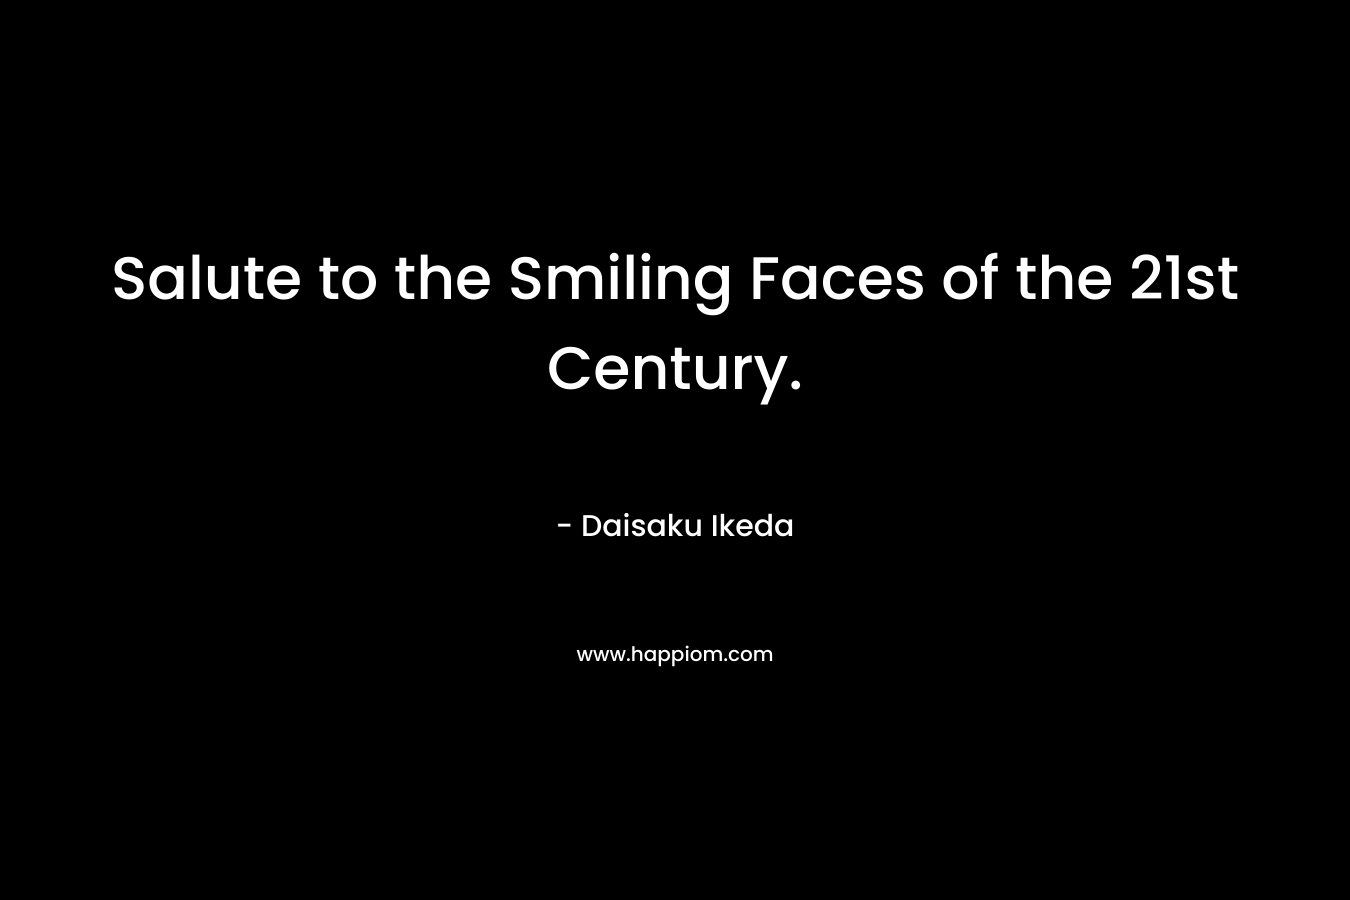 Salute to the Smiling Faces of the 21st Century. – Daisaku Ikeda